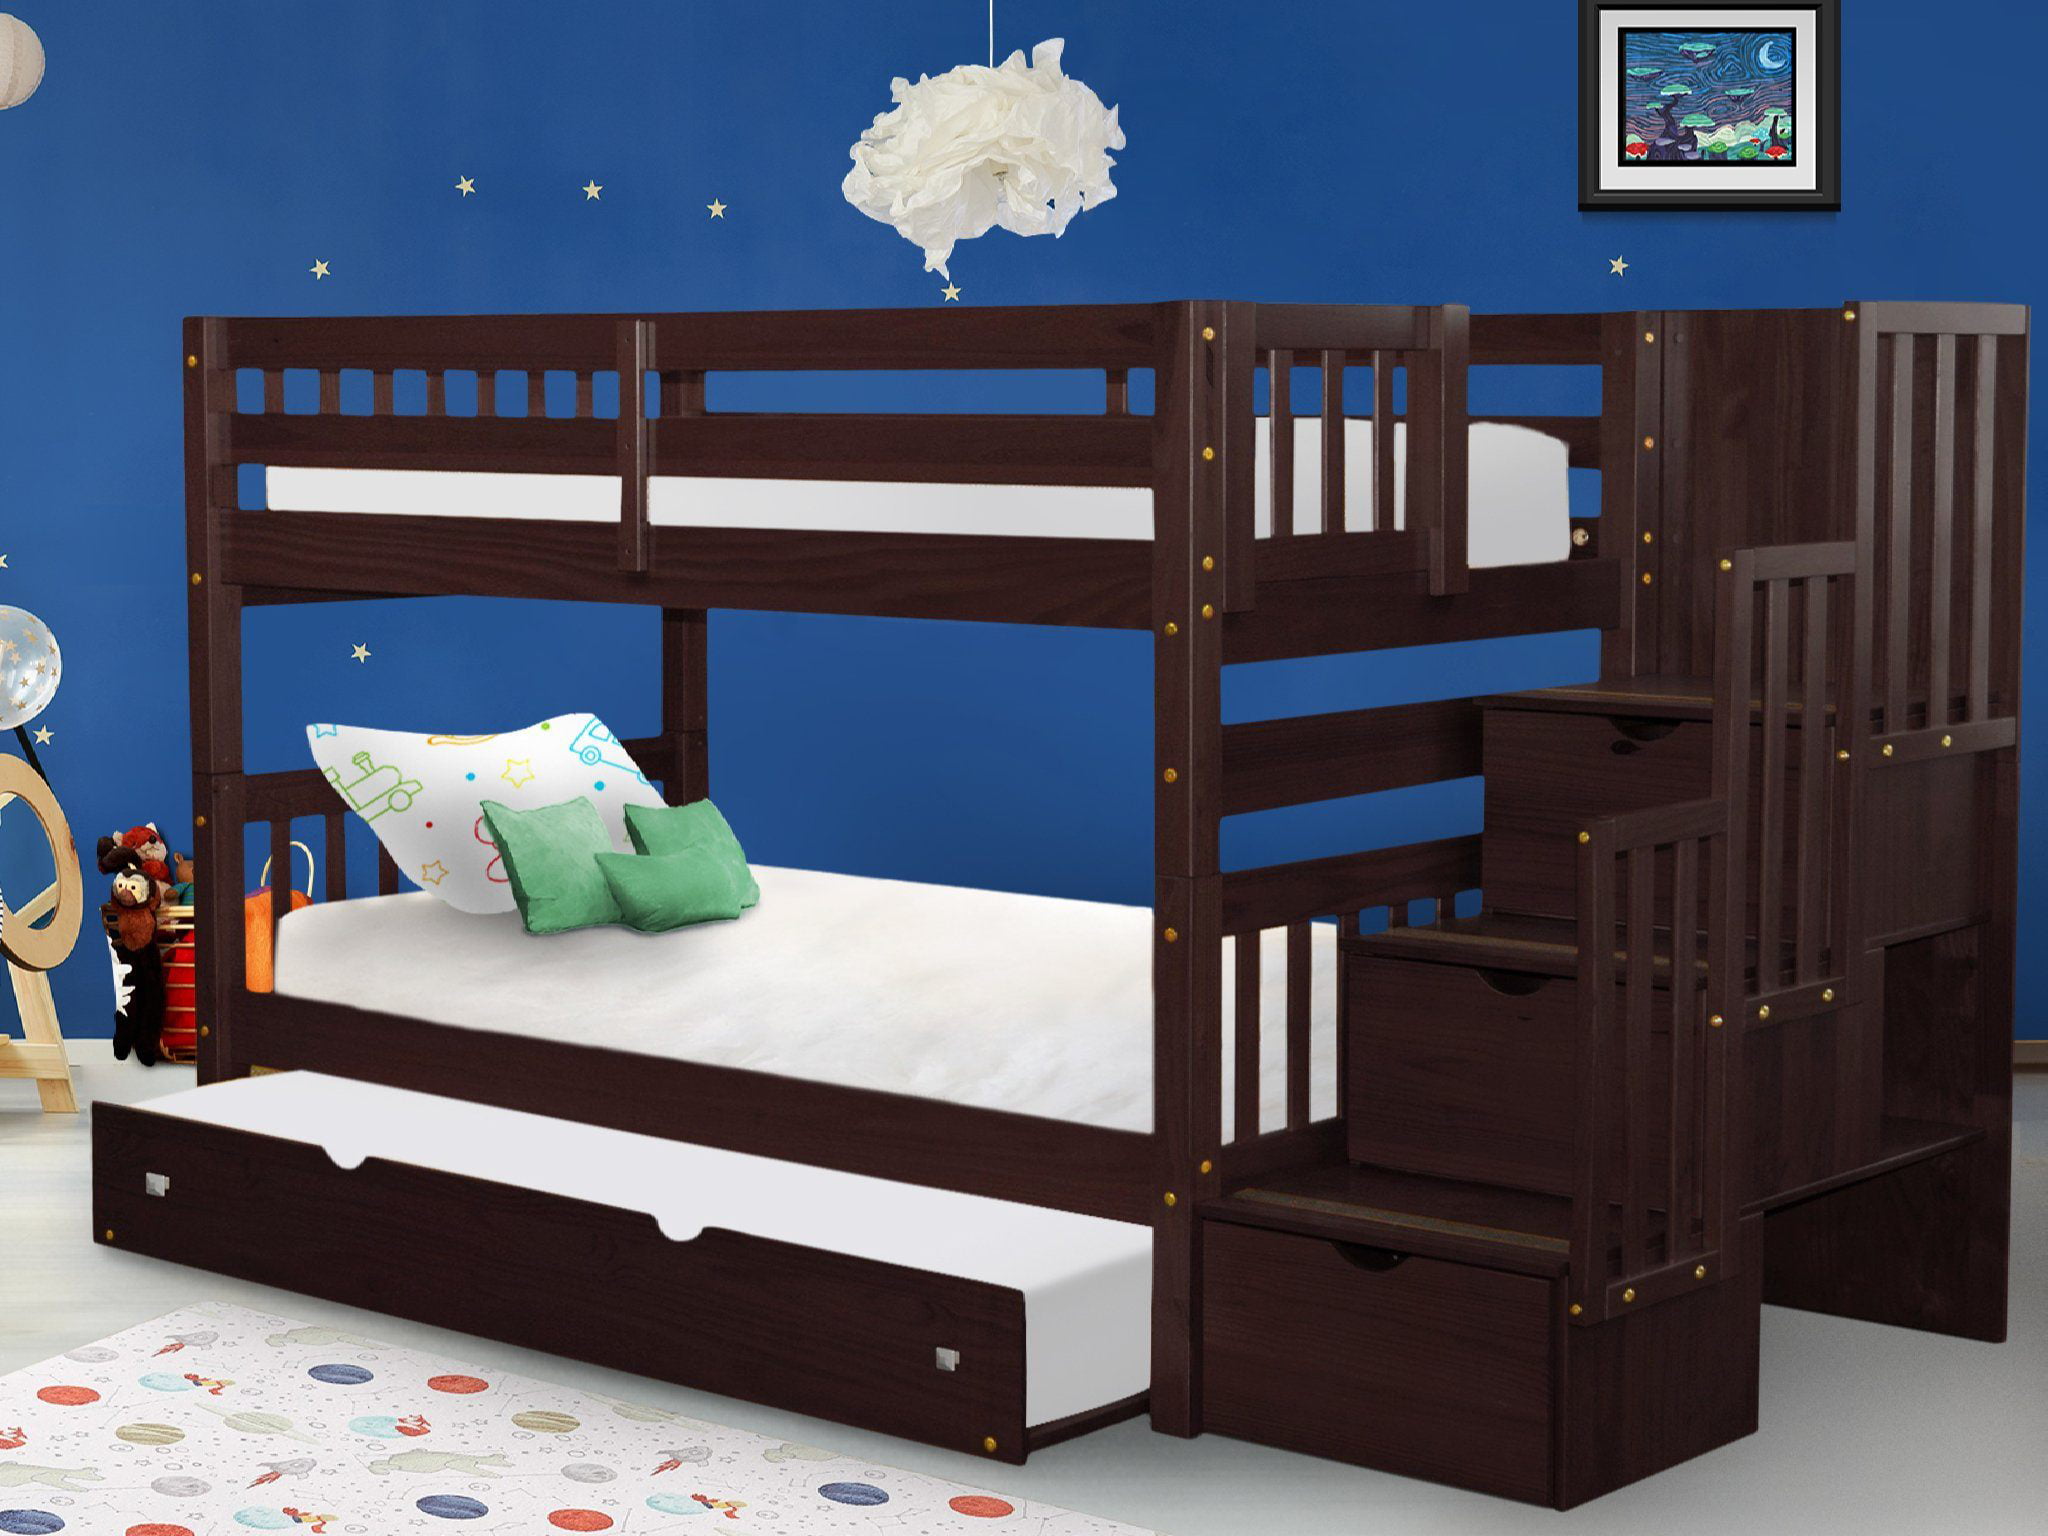 Bedz King Stairway Bunk Beds Twin Over, King Over King Bunk Bed